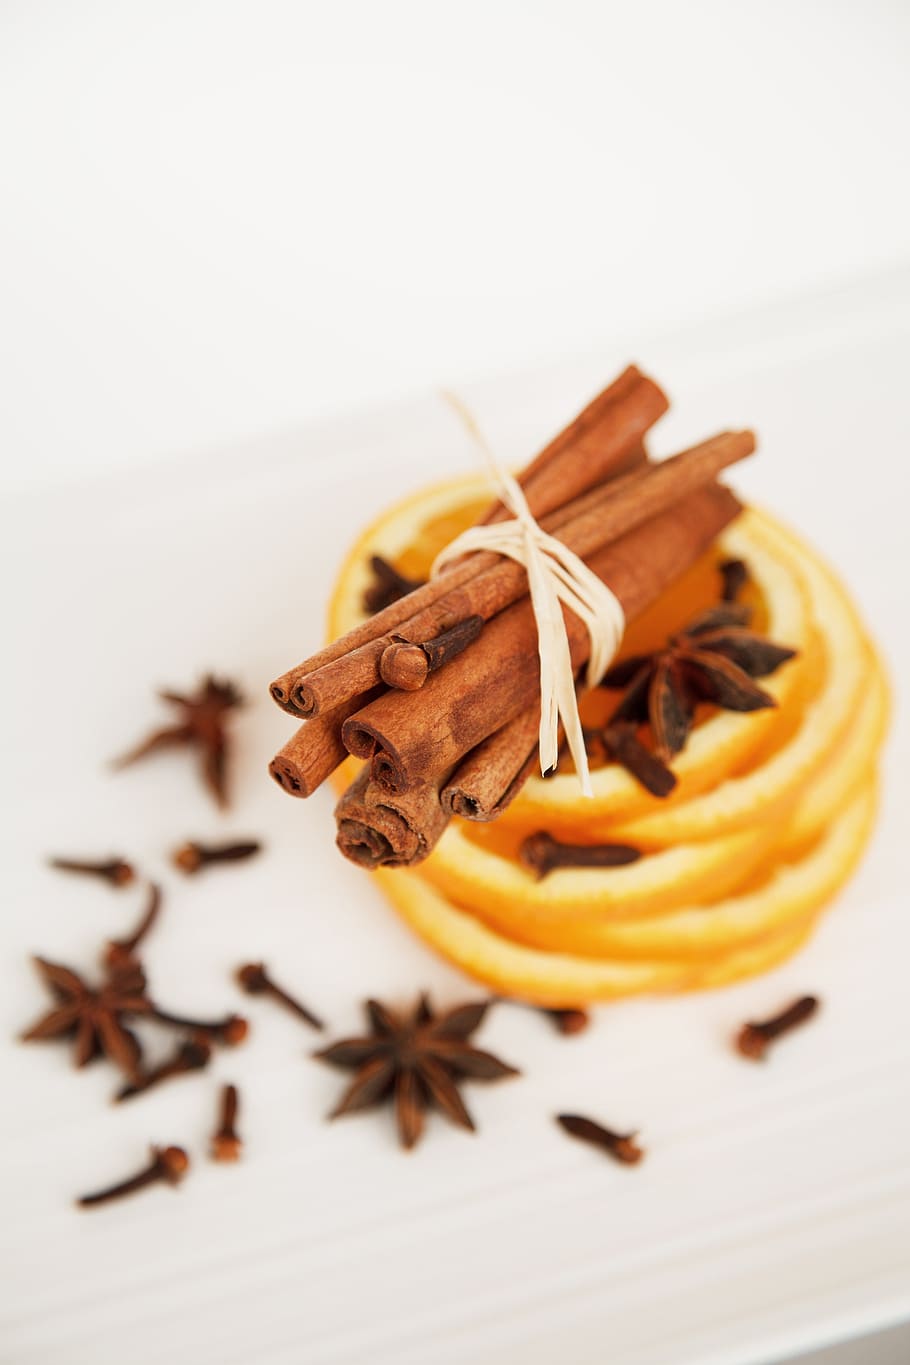 star anise, cinnamon sticks, anise, brown, christmas, cinnamon, close up, spice, spices, food and drink